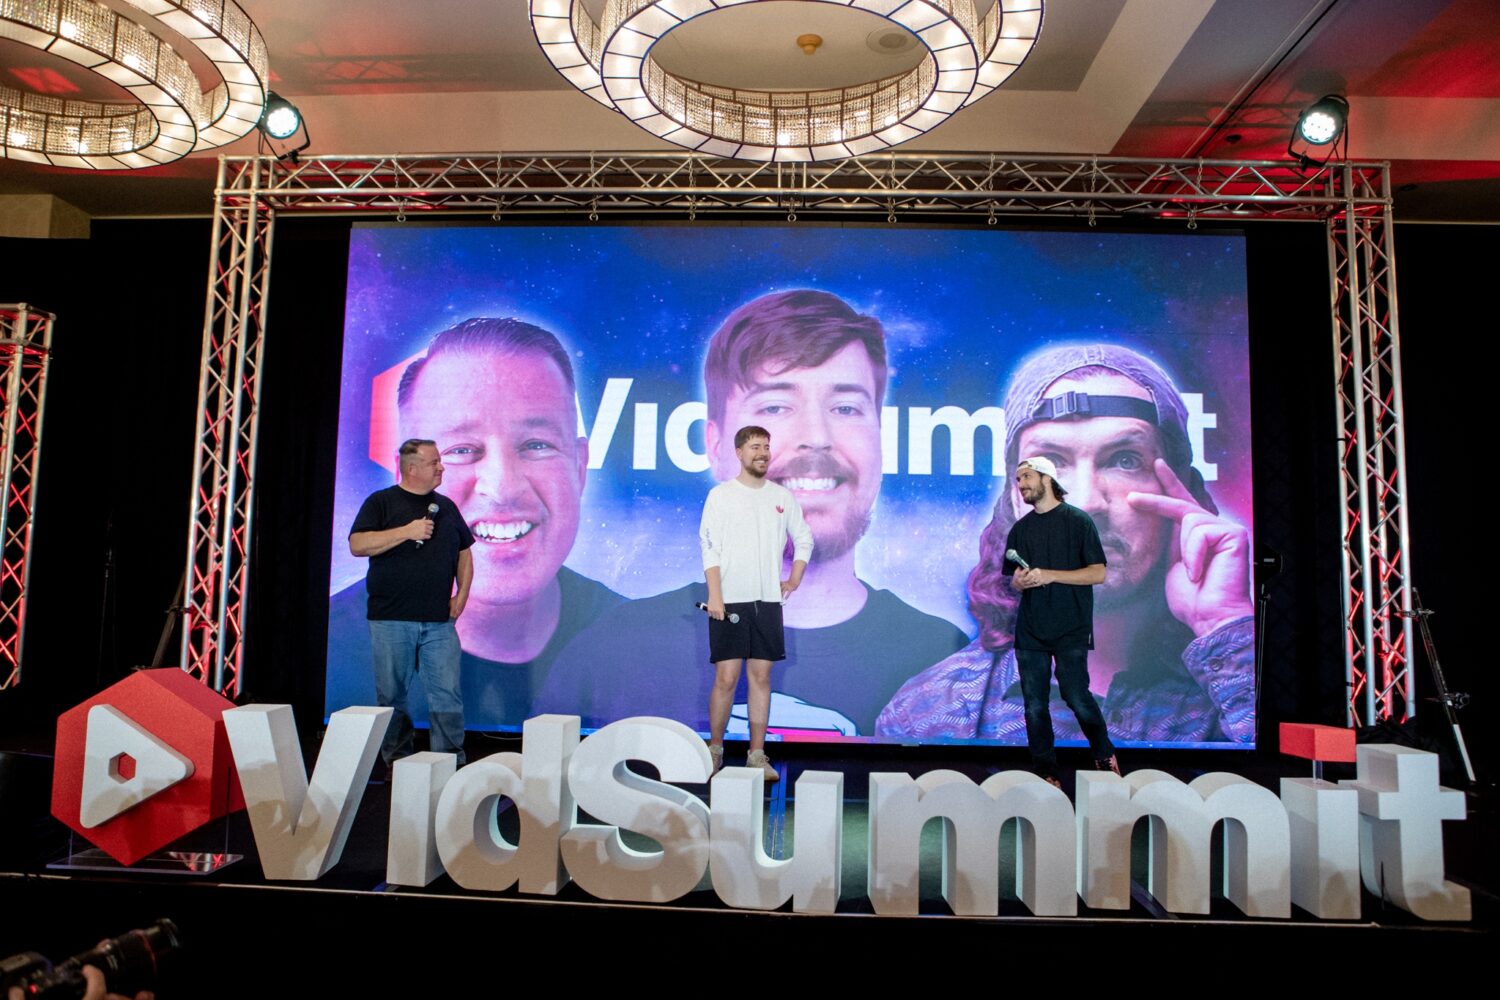 Derral Eves, founder of Creatus, Vidsummit and the YouTube Formula, on the ups and downs of his career and how he produced the #1 crowdfunded TV series ever.